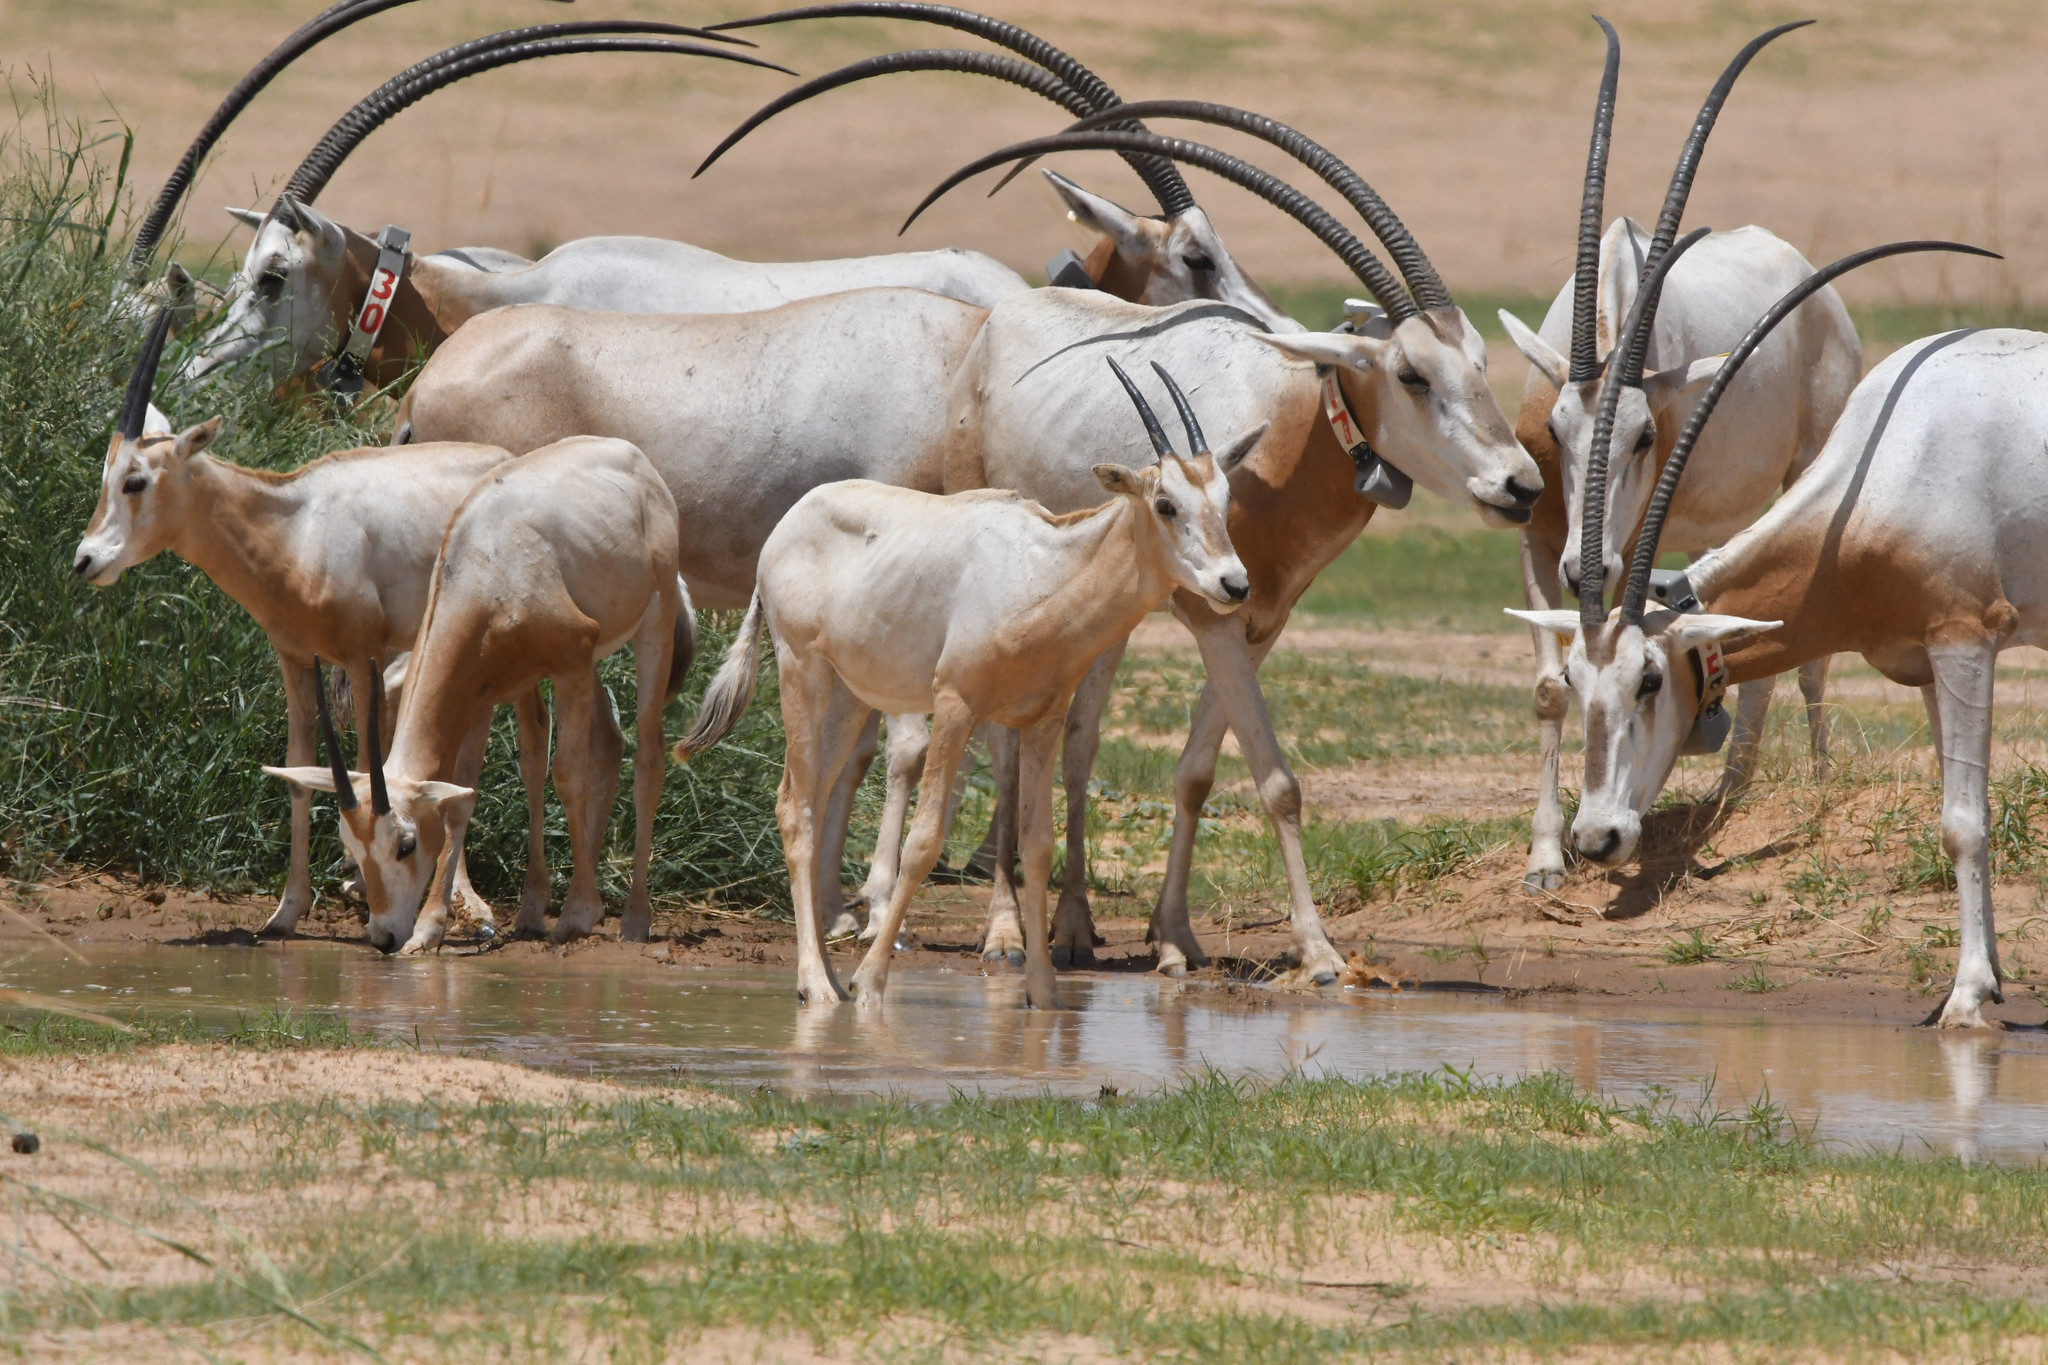 Mature scimitar horned oryx with calves drinking from an oasis in the Sahara, making eye contact Image: JOHN NEWBY 2023